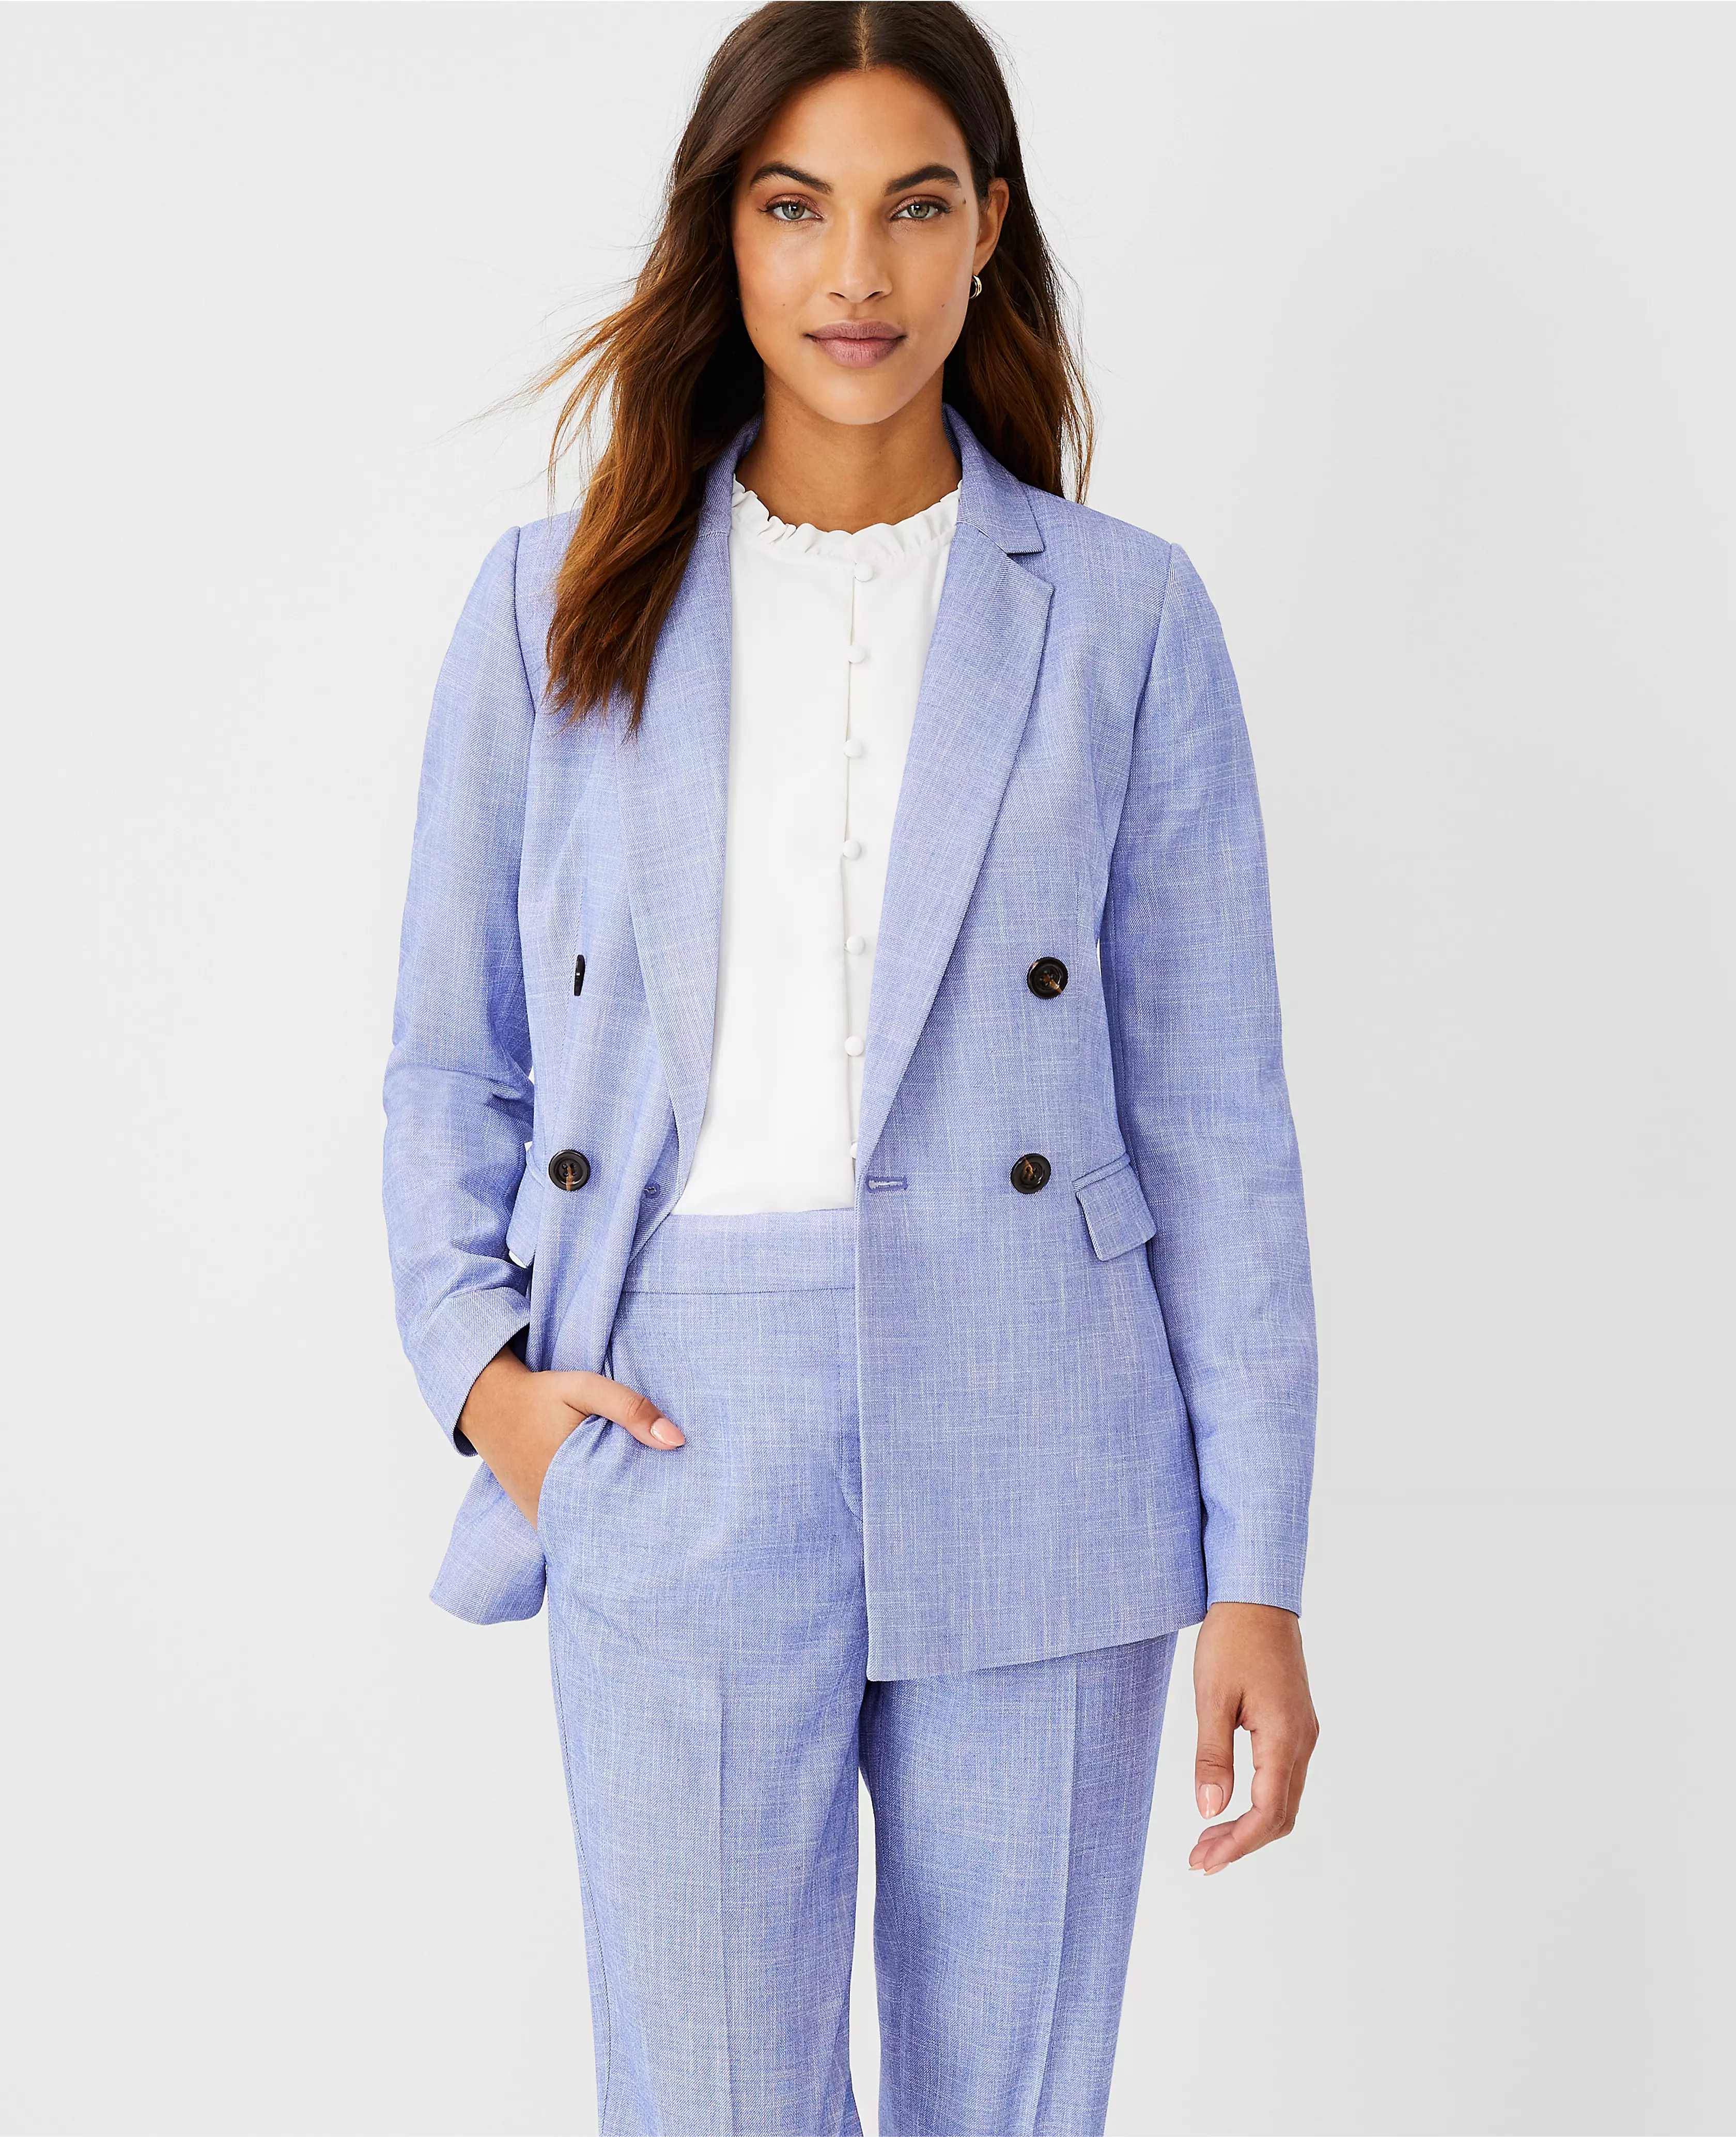 The Petite Relaxed Double Breasted Long Blazer in Cross Weave